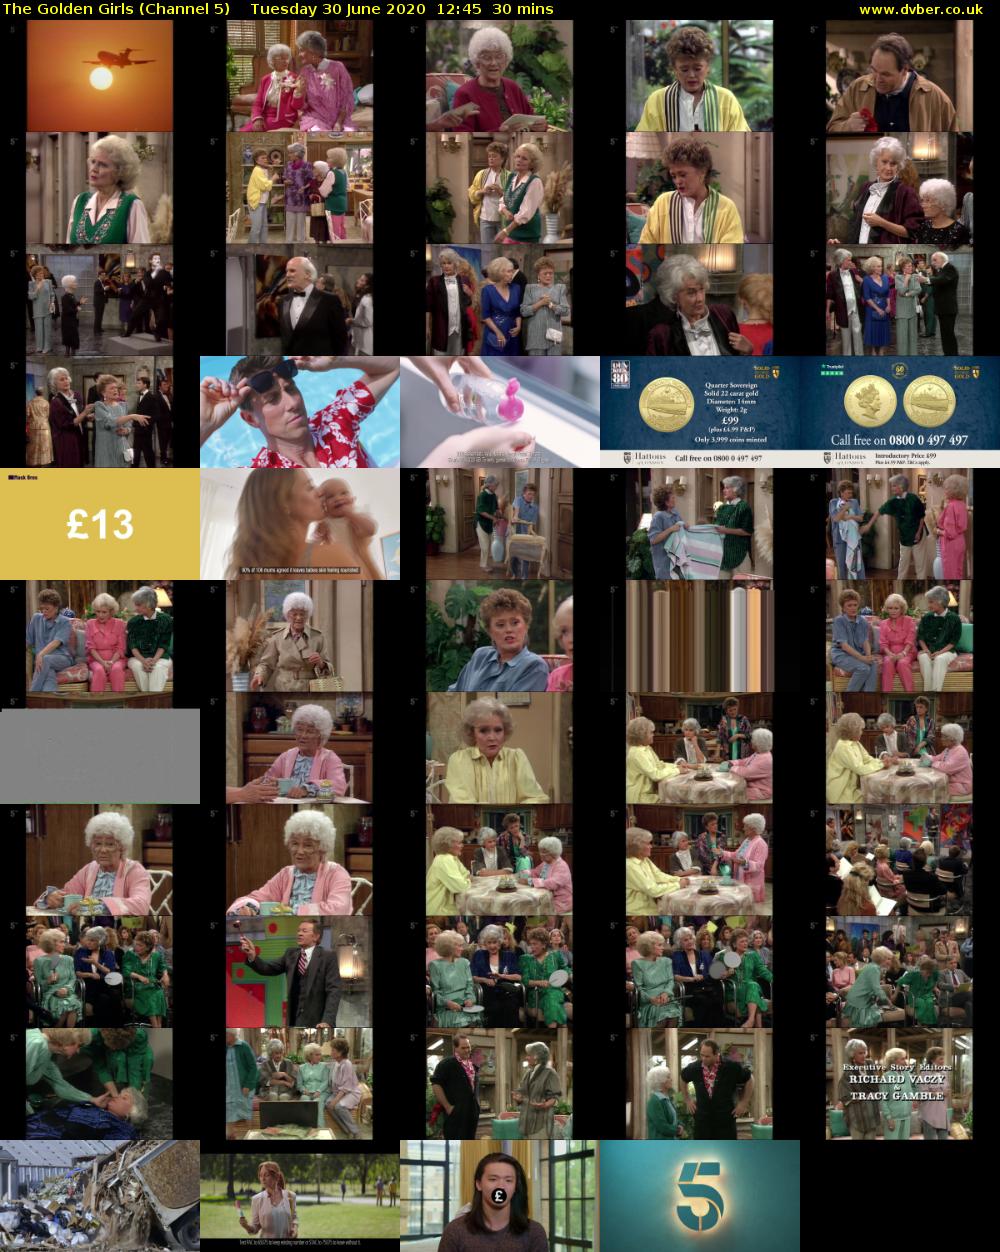 The Golden Girls (Channel 5) Tuesday 30 June 2020 12:45 - 13:15